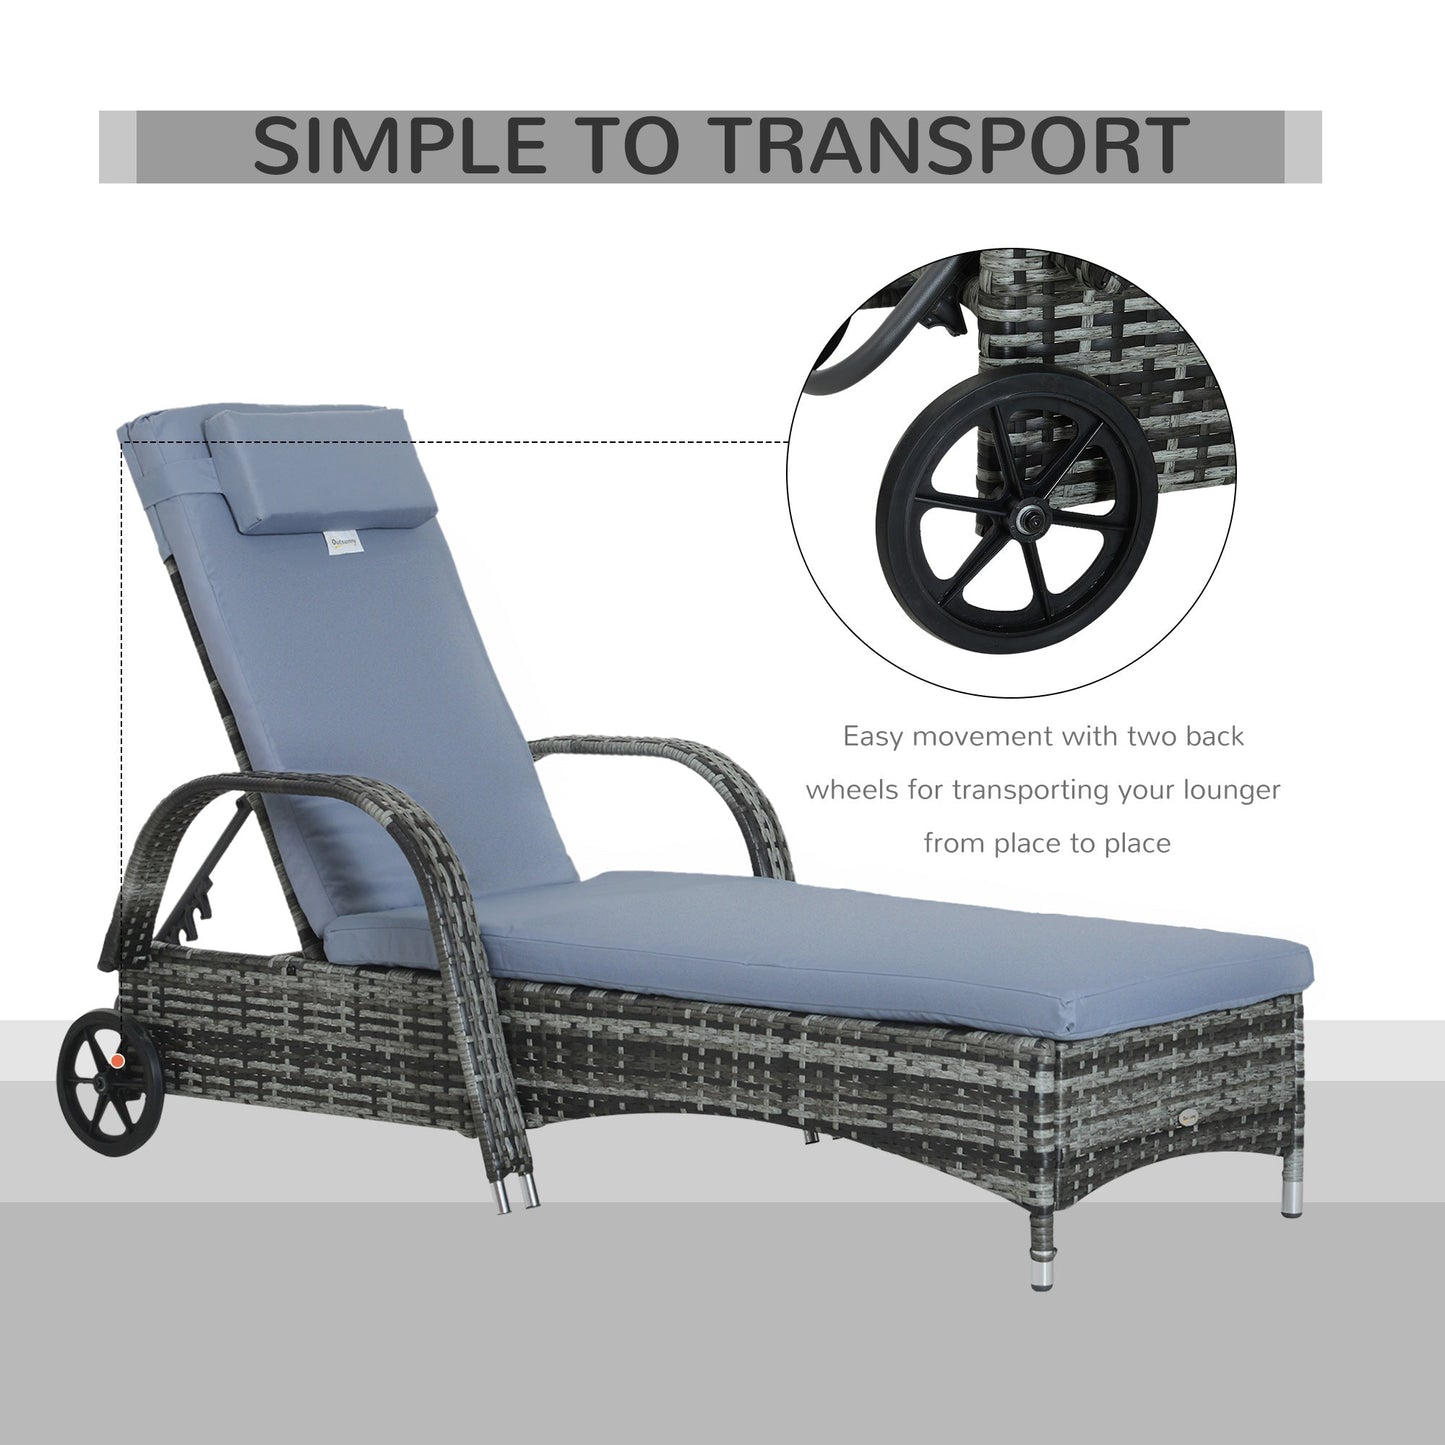 Outdoor and Garden-Wicker Chaise Lounge Chair Outdoor with Cushion, PE Rattan Outdoor Lounge Chair, Height Adjustable Backrest & Wheels, Grey - Outdoor Style Company